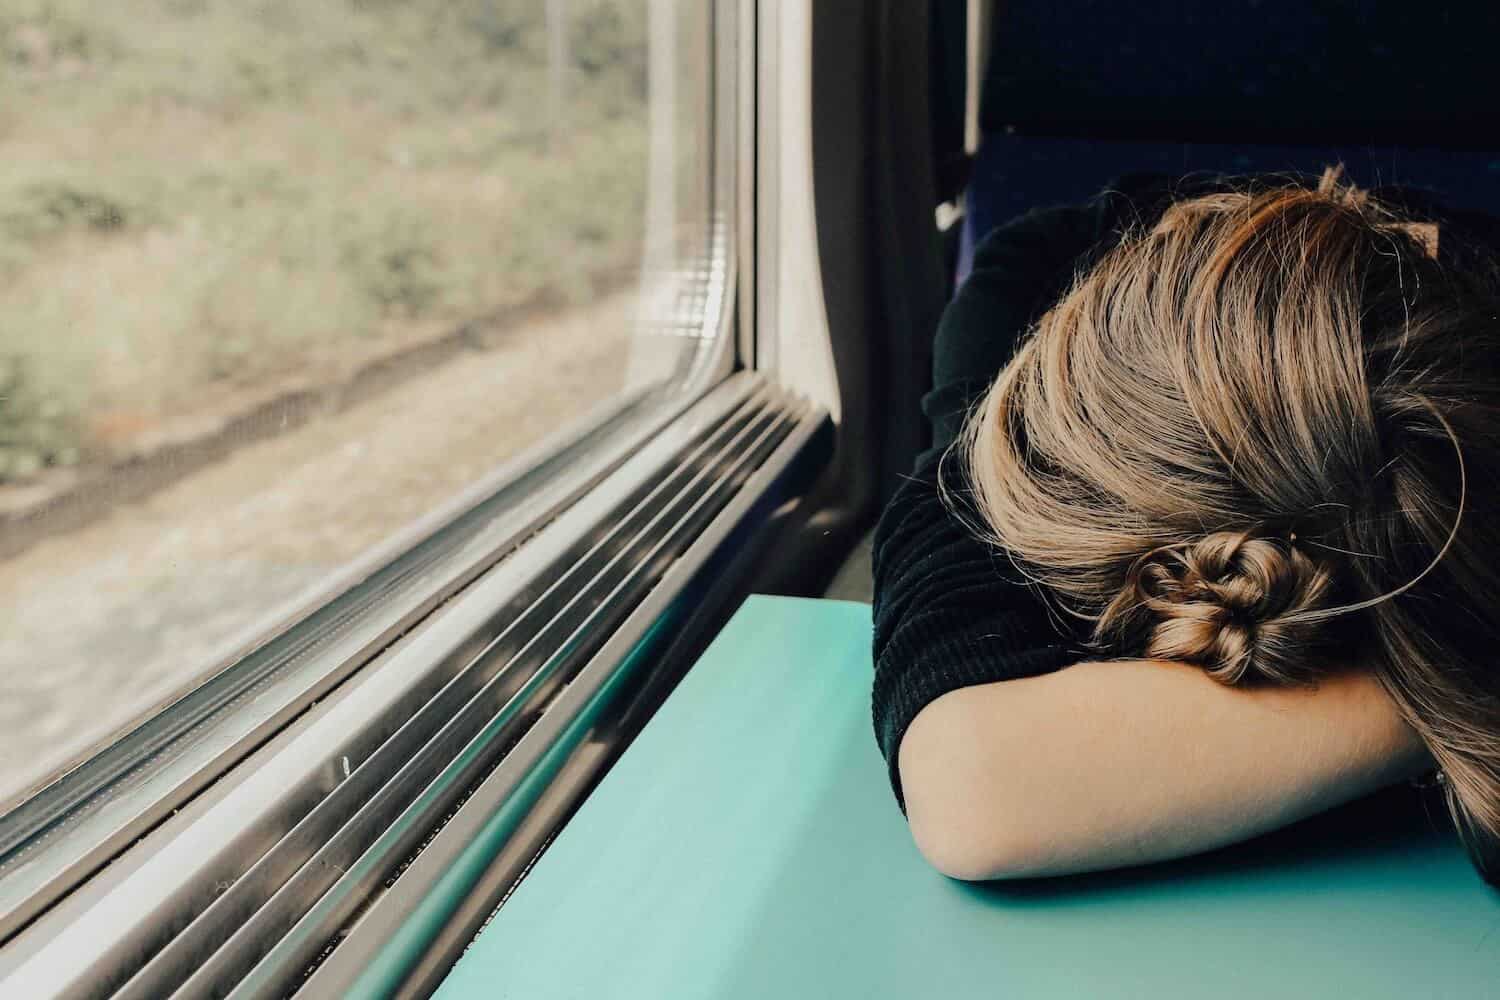 Can Improving Your Immune System Aid Narcolepsy Symptoms?